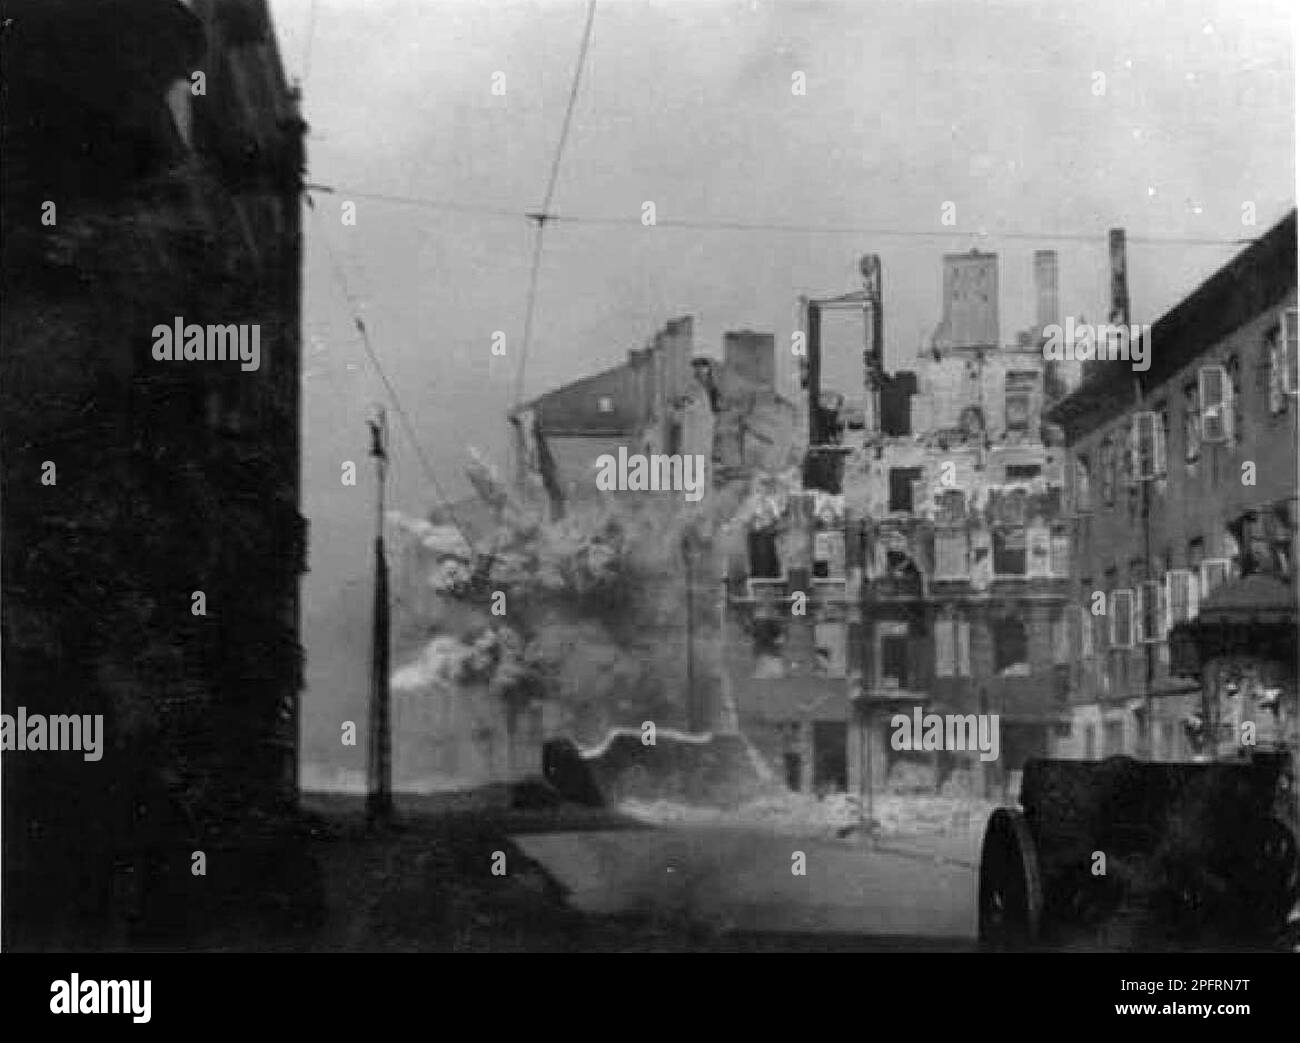 In January 1943 the nazis arrived to round up the Jews of the Warsaw Ghetto  The Jews, resolved to fight it out, took on the SS with homemade and primitive weapons. The defenders were executed or deported and the Ghetto area was systematically demolished. This event is known as The Ghetto Uprising. This image shows the city in various stages of its destruction. This image is from the German photographic record of the event, known as the Stroop report. Stock Photo